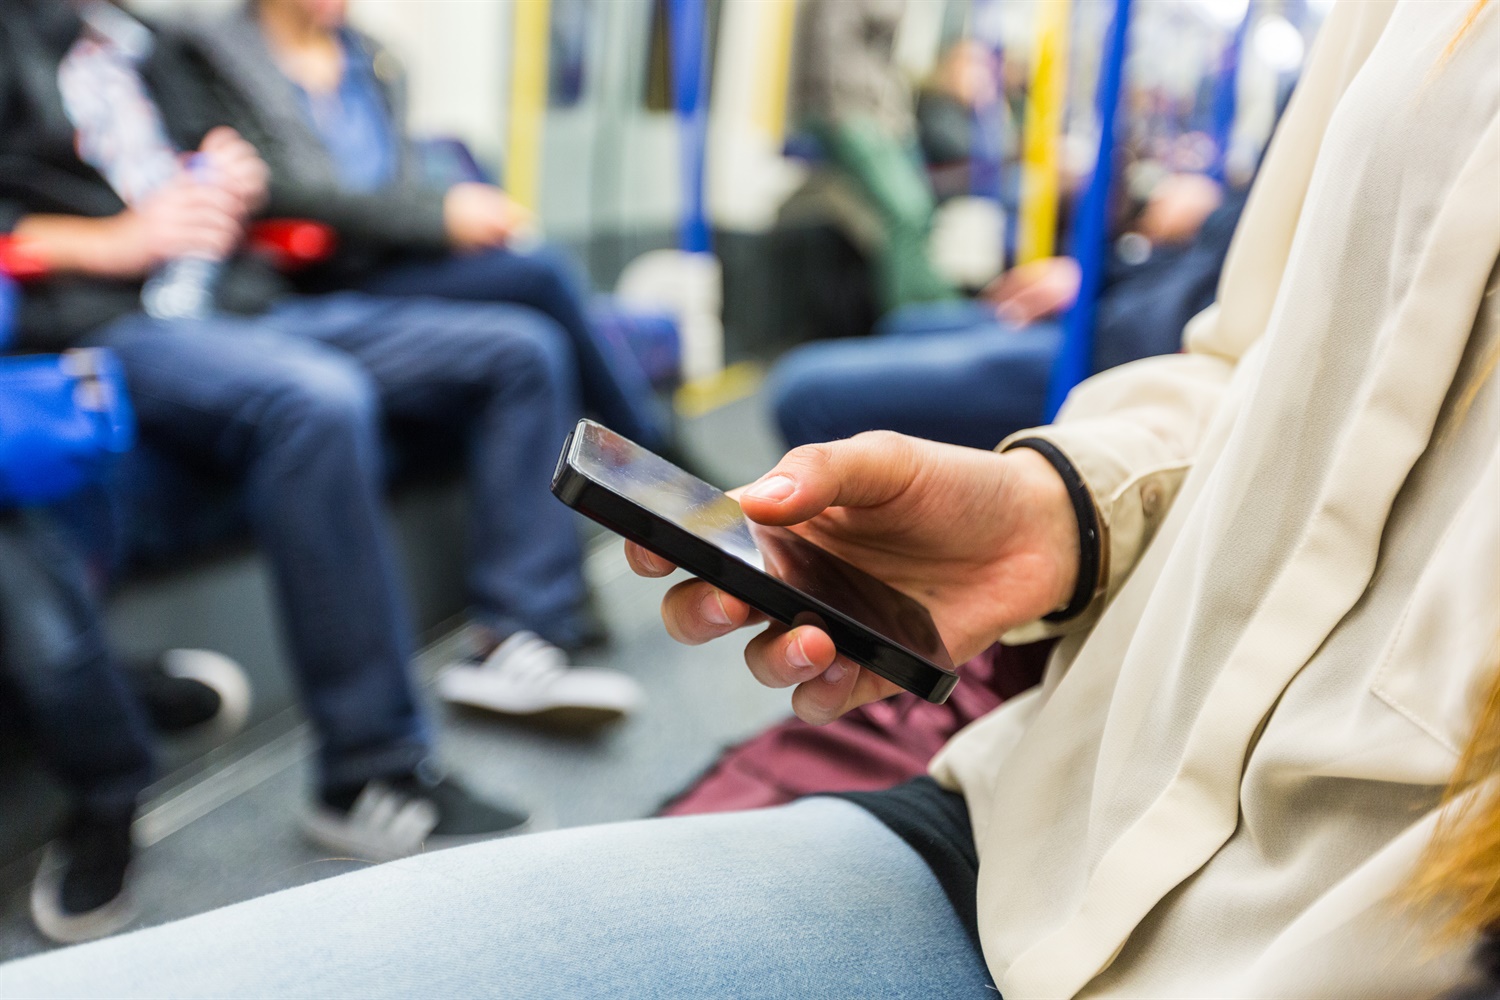 Successful trial means Tube on track for 4G coverage by 2019